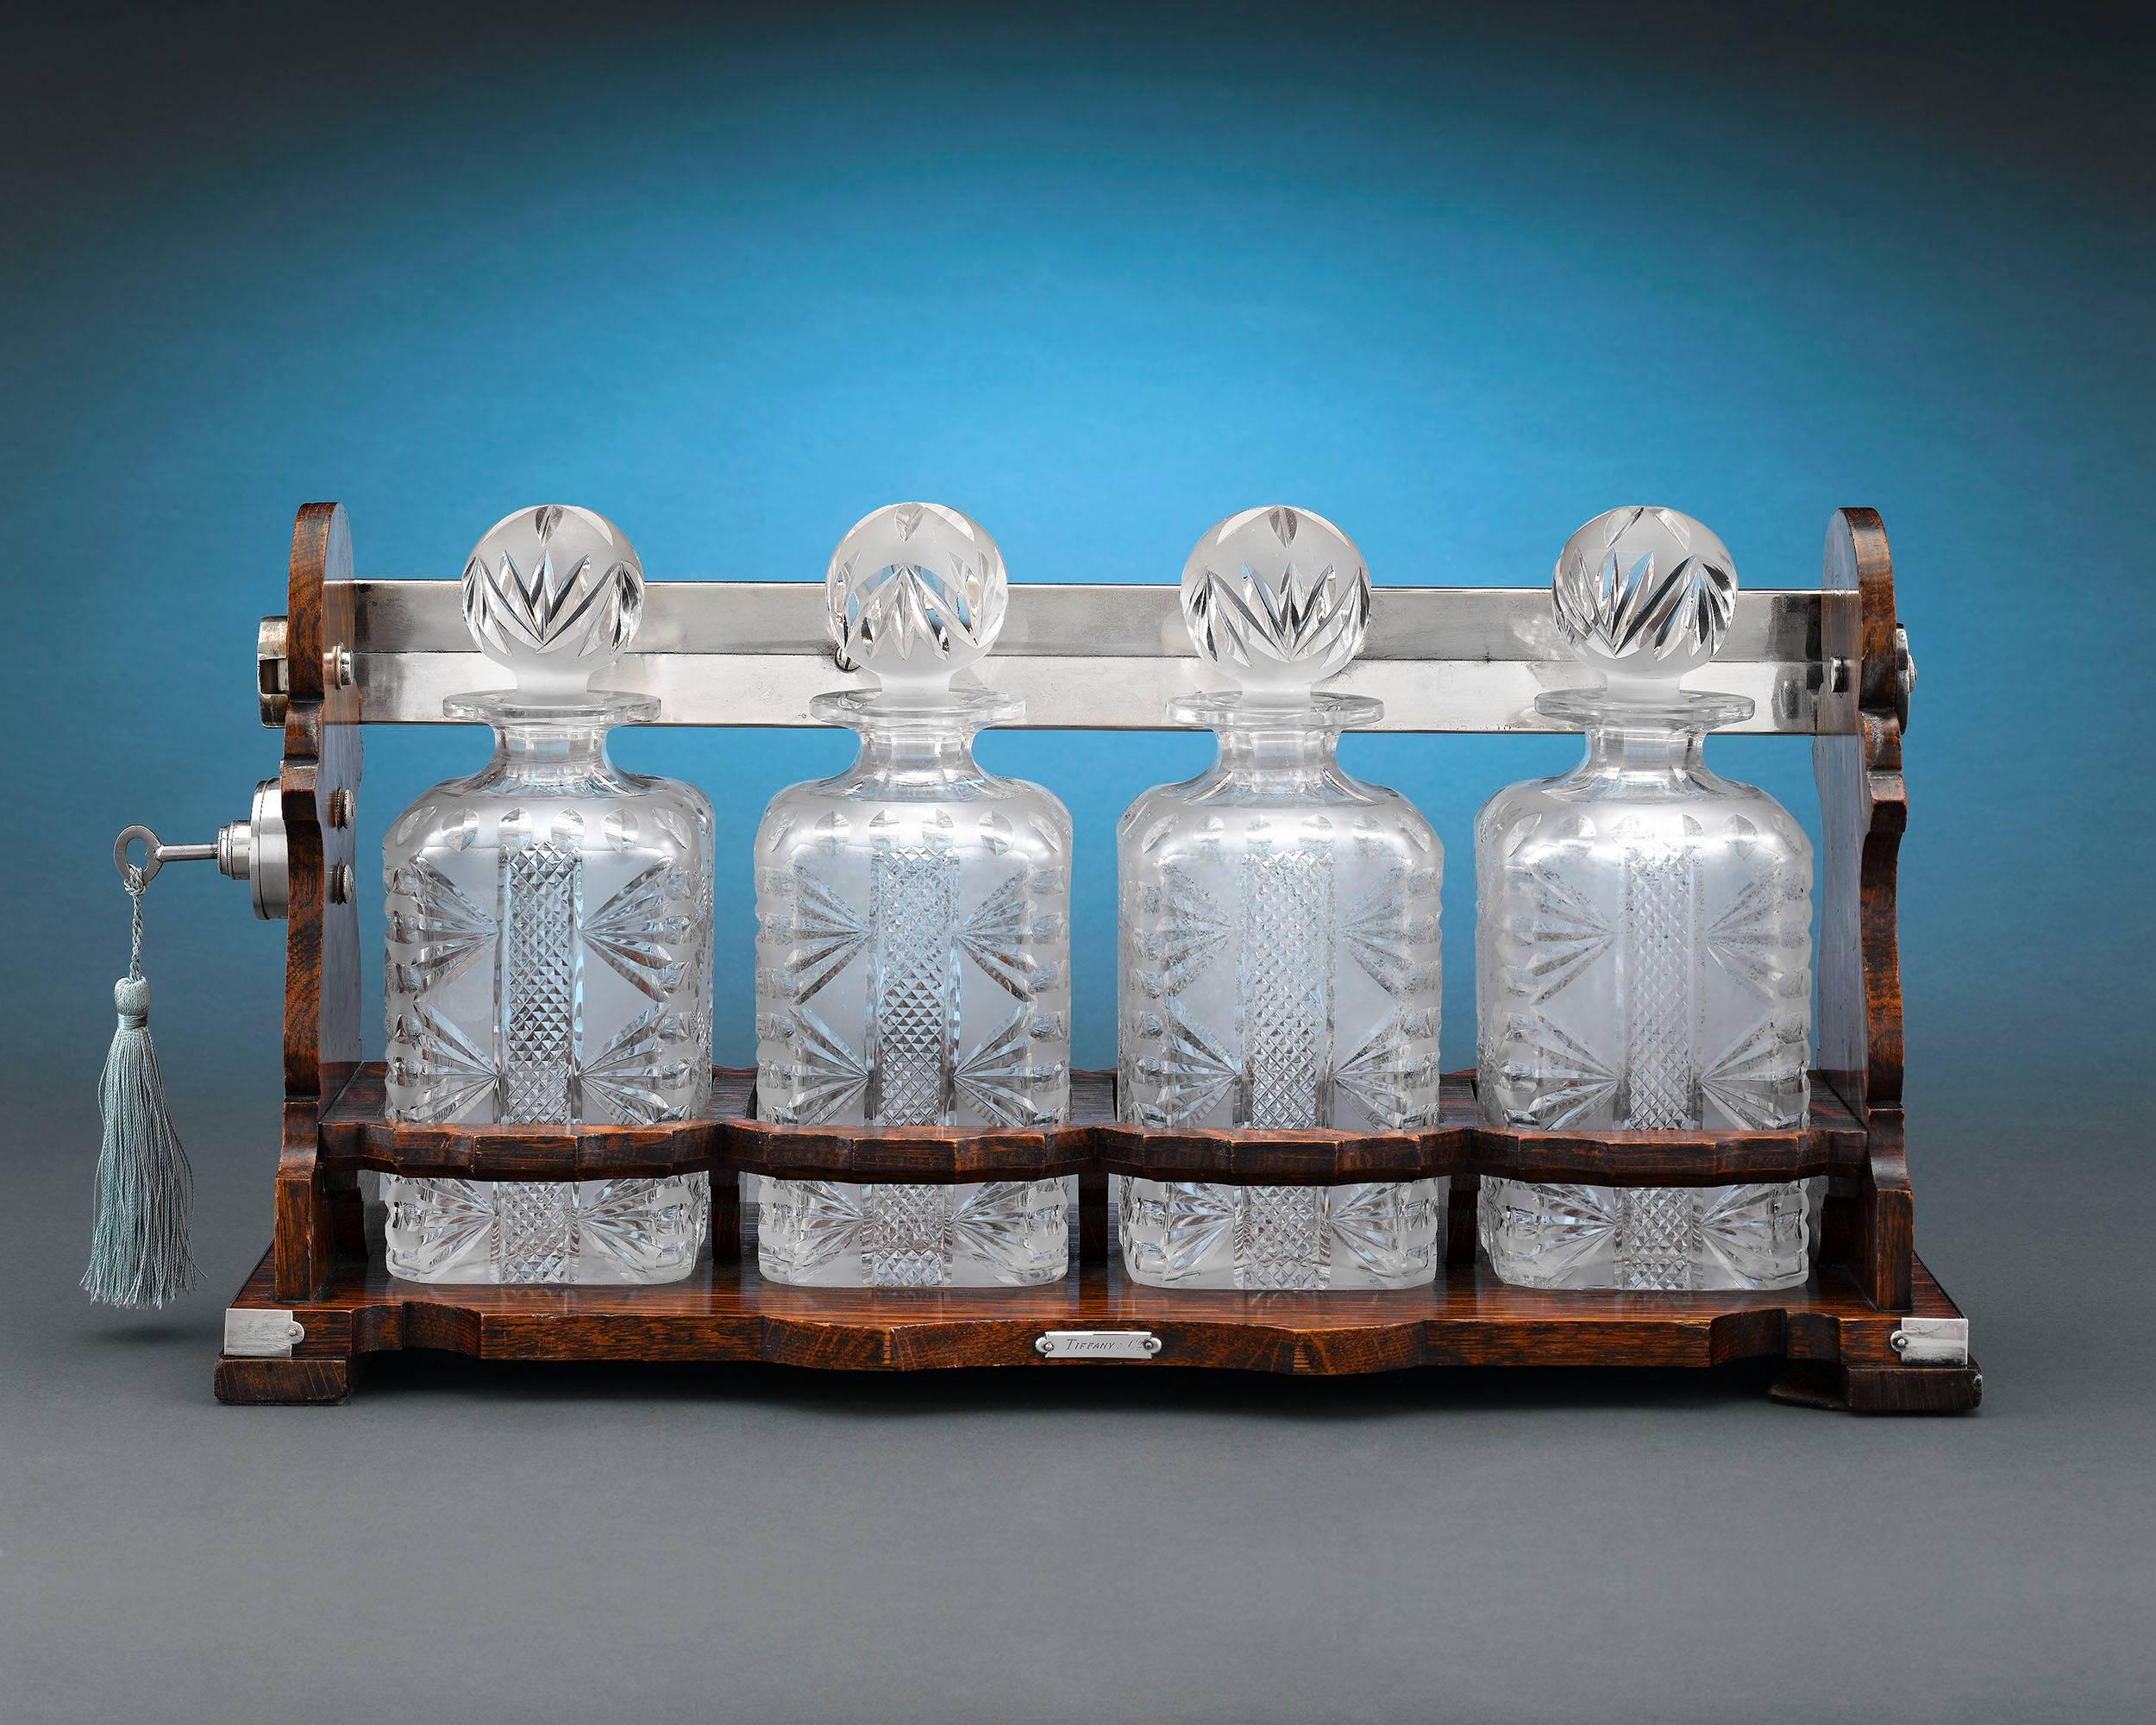 Retailed by Tiffany & Co., this rare and wonderful tantalus was patented by Netherlander cabinetmaker George Betjemann in 1881. Typically containing two or three crystal decanters, this particular model holds four, and is crafted of fine oak and